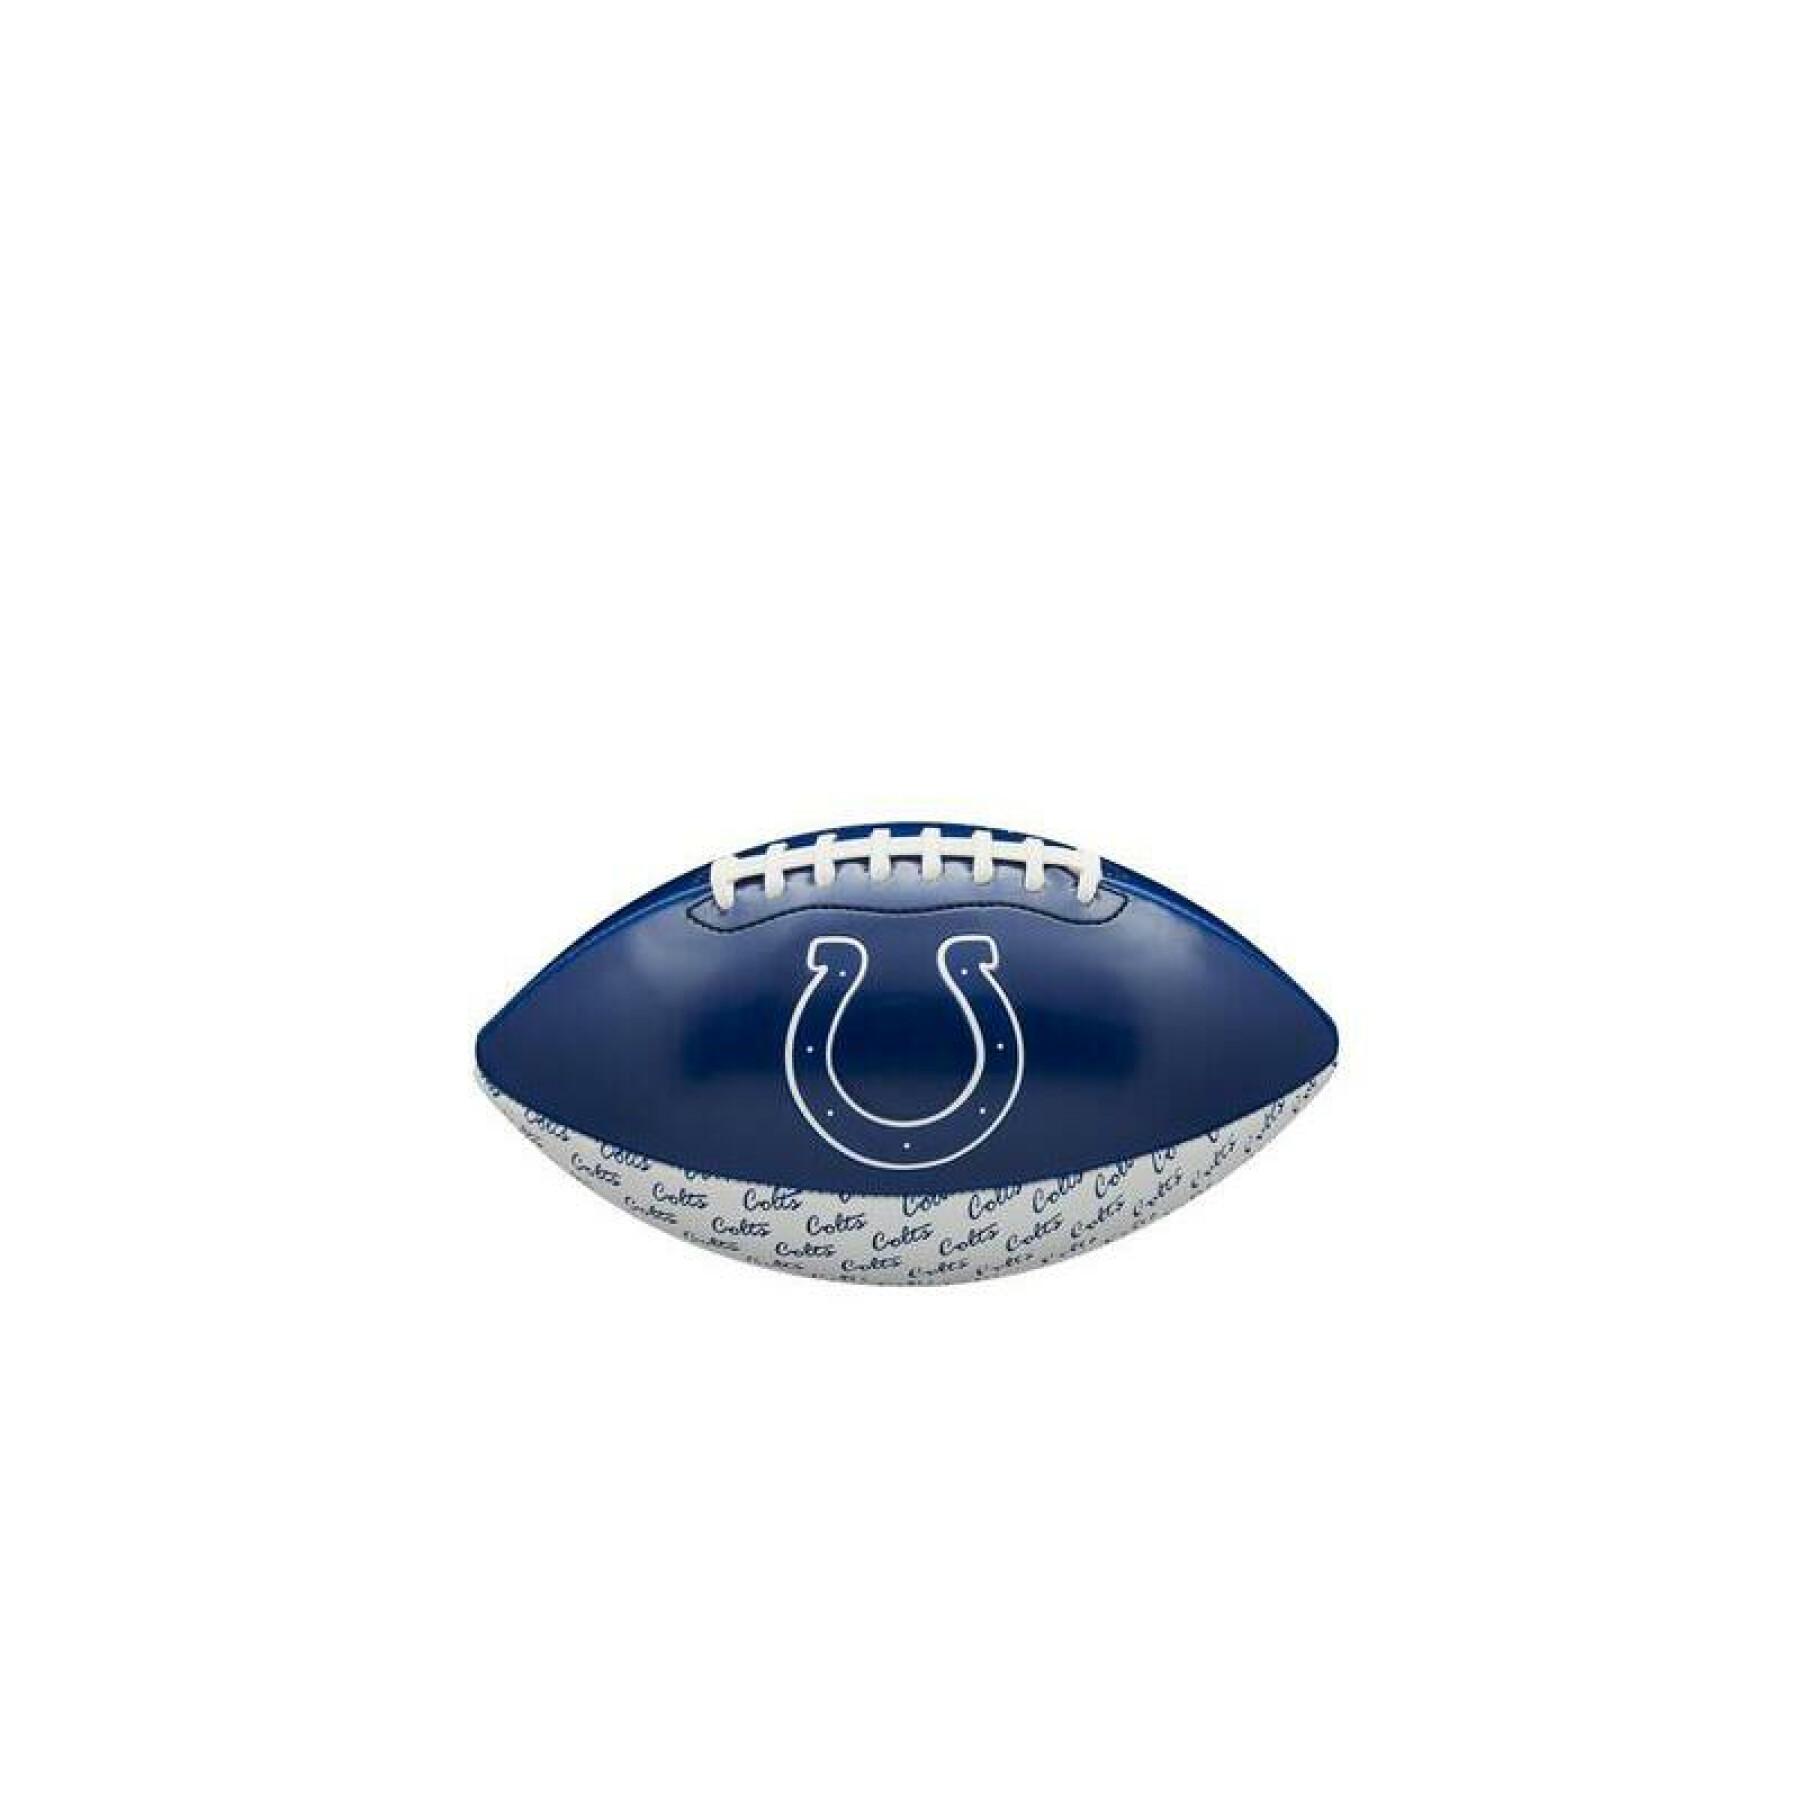 Children's mini football NFL Indianapolis Colts